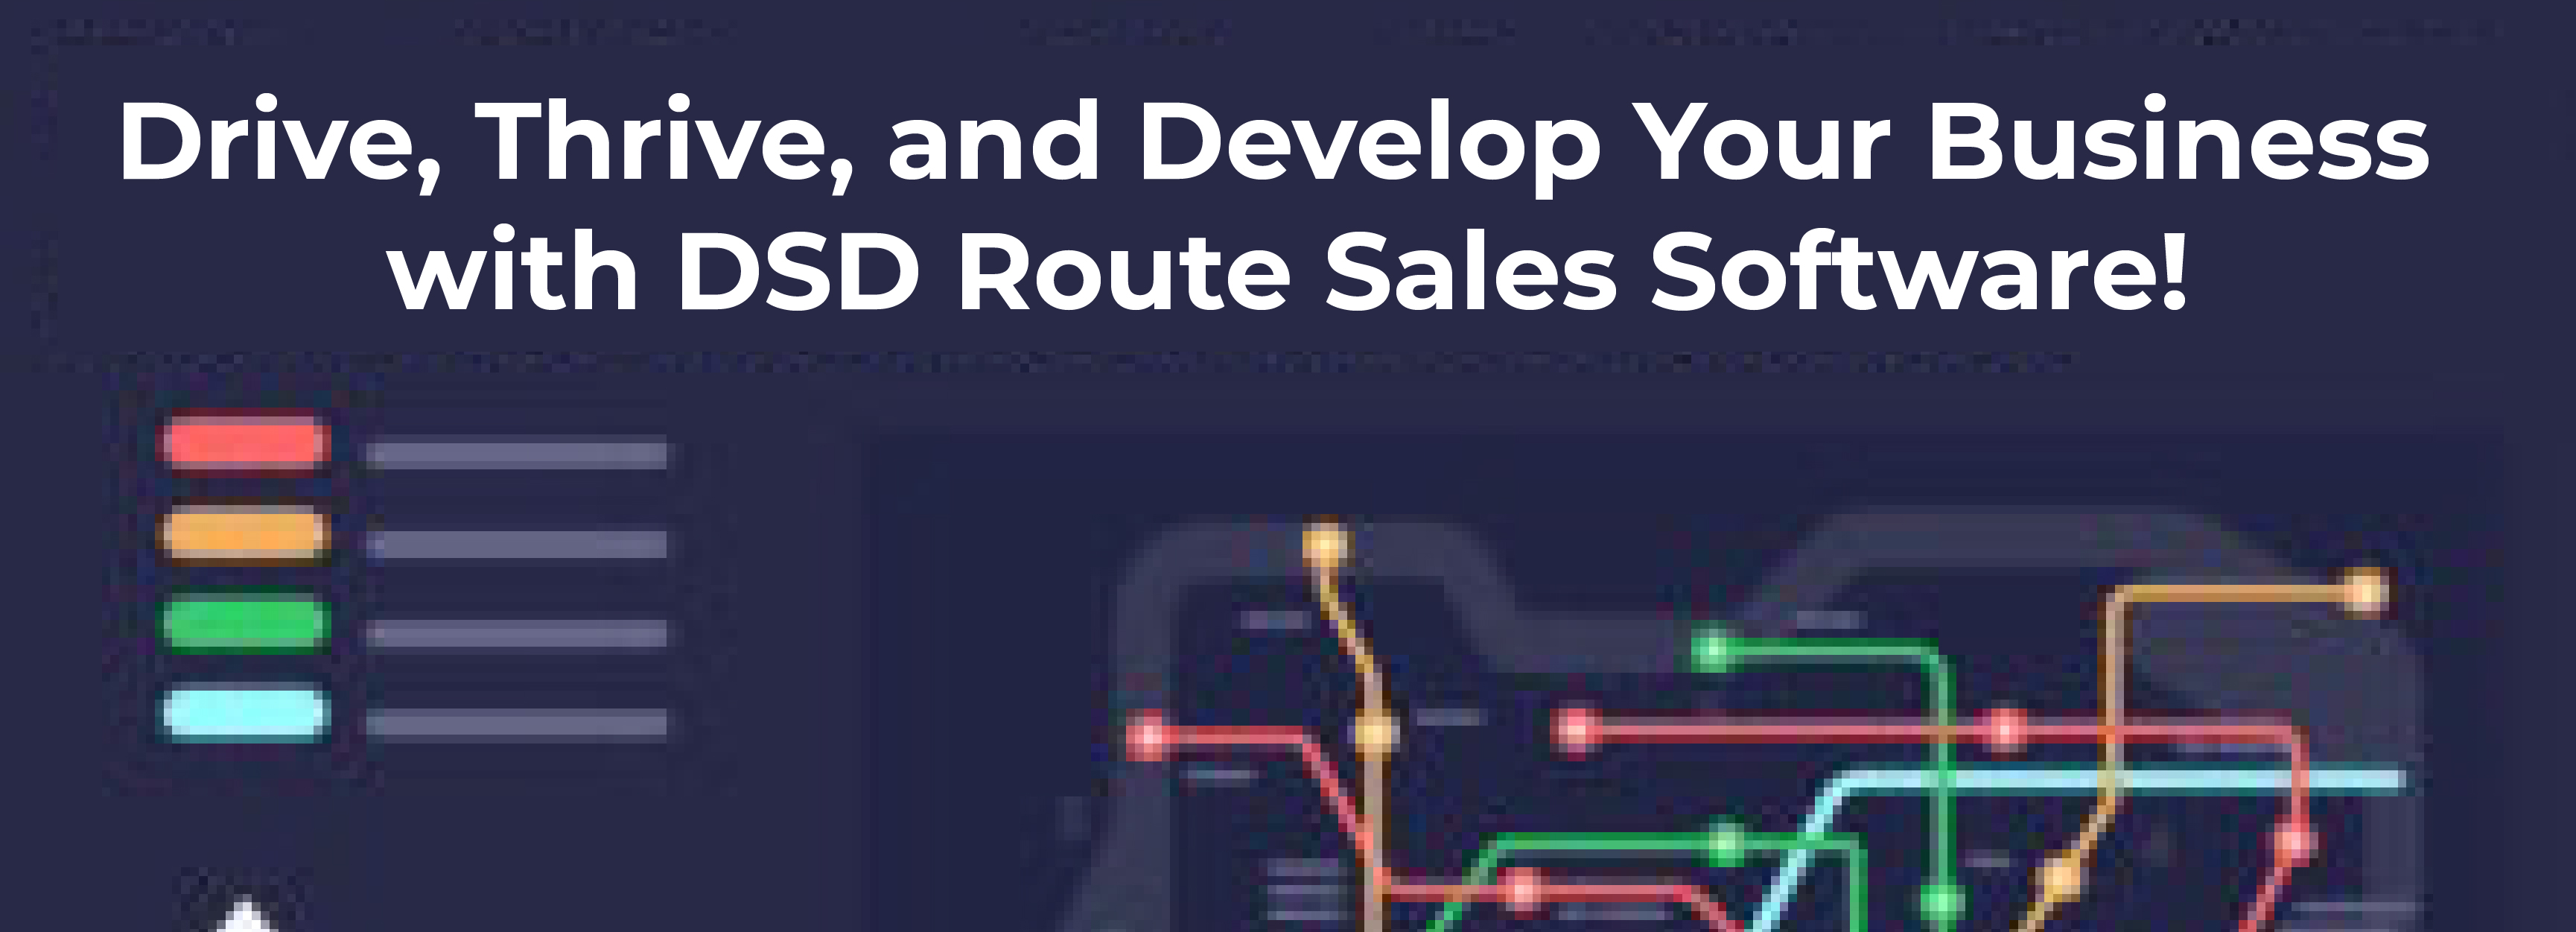 Drive, Thrive, and Develop Your Business with DSD Route Sales Software!